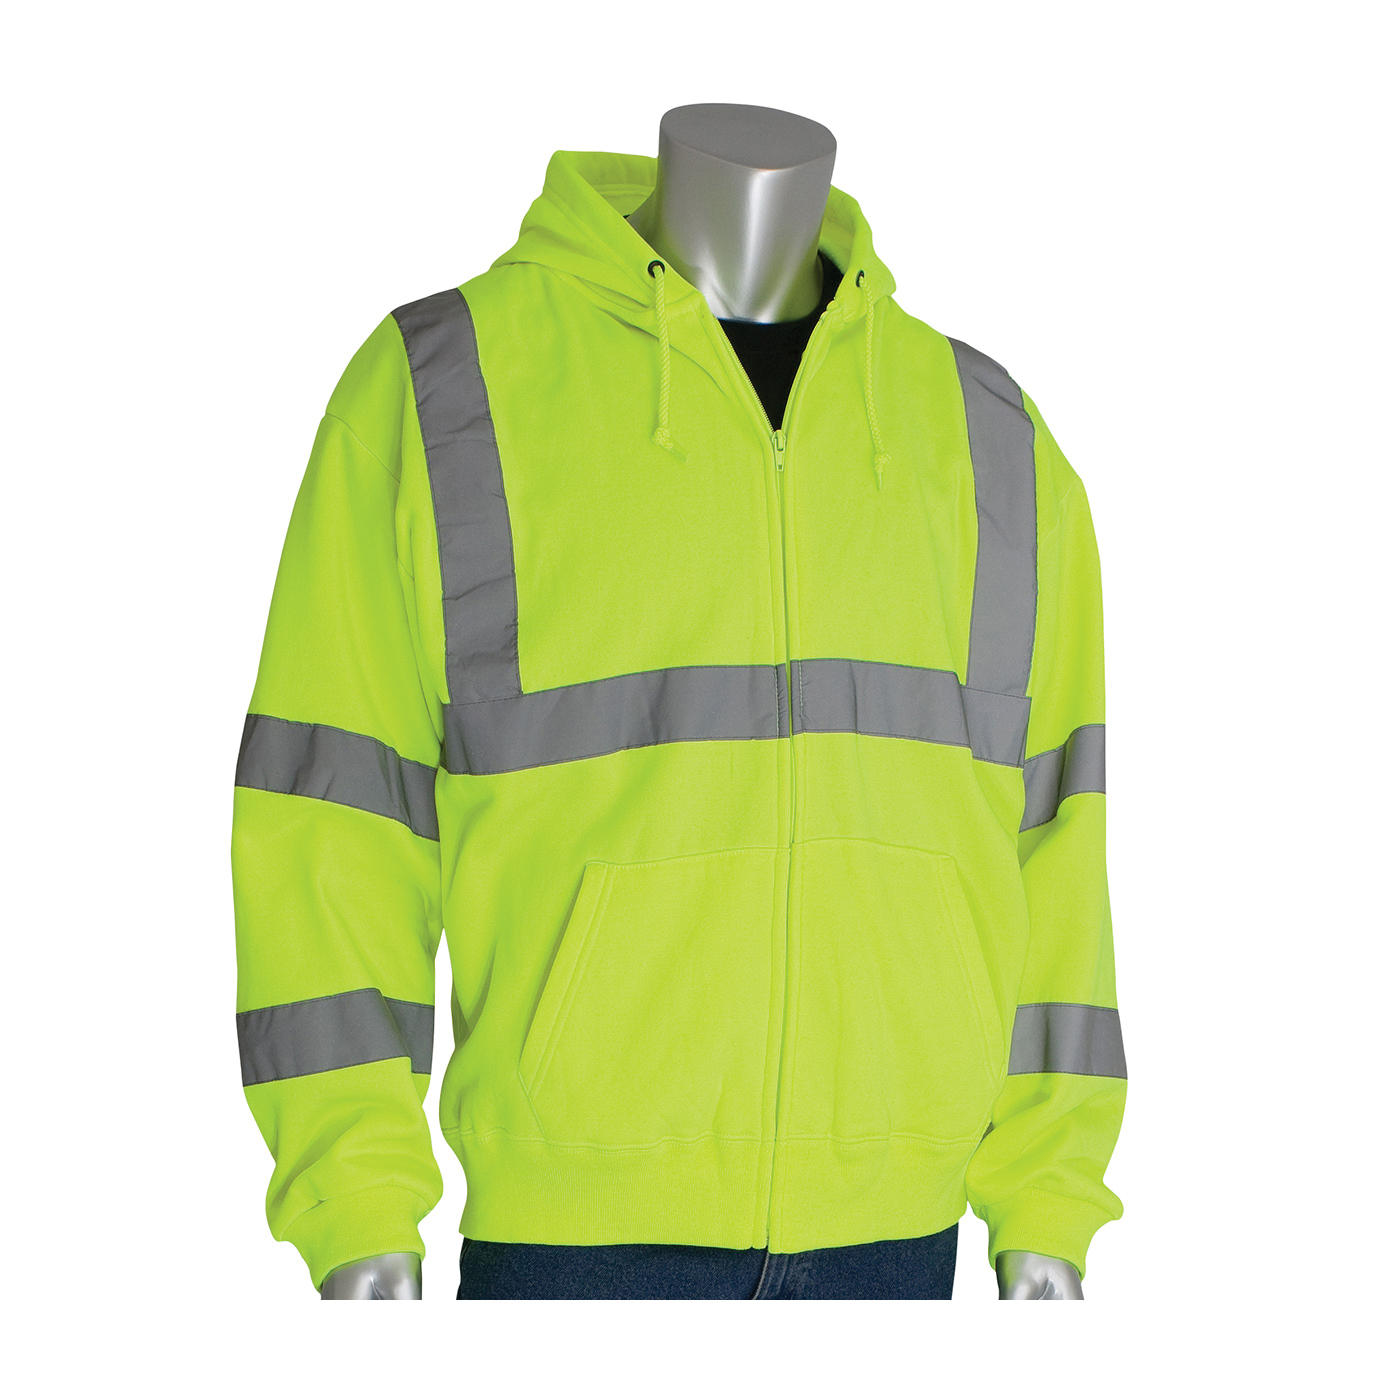 PIP® SafetyGear 323-HSSELY-4X Premium High Visibility Sweatshirt, 4XL, Yellow, Wicking Polyester, 30.7 in L